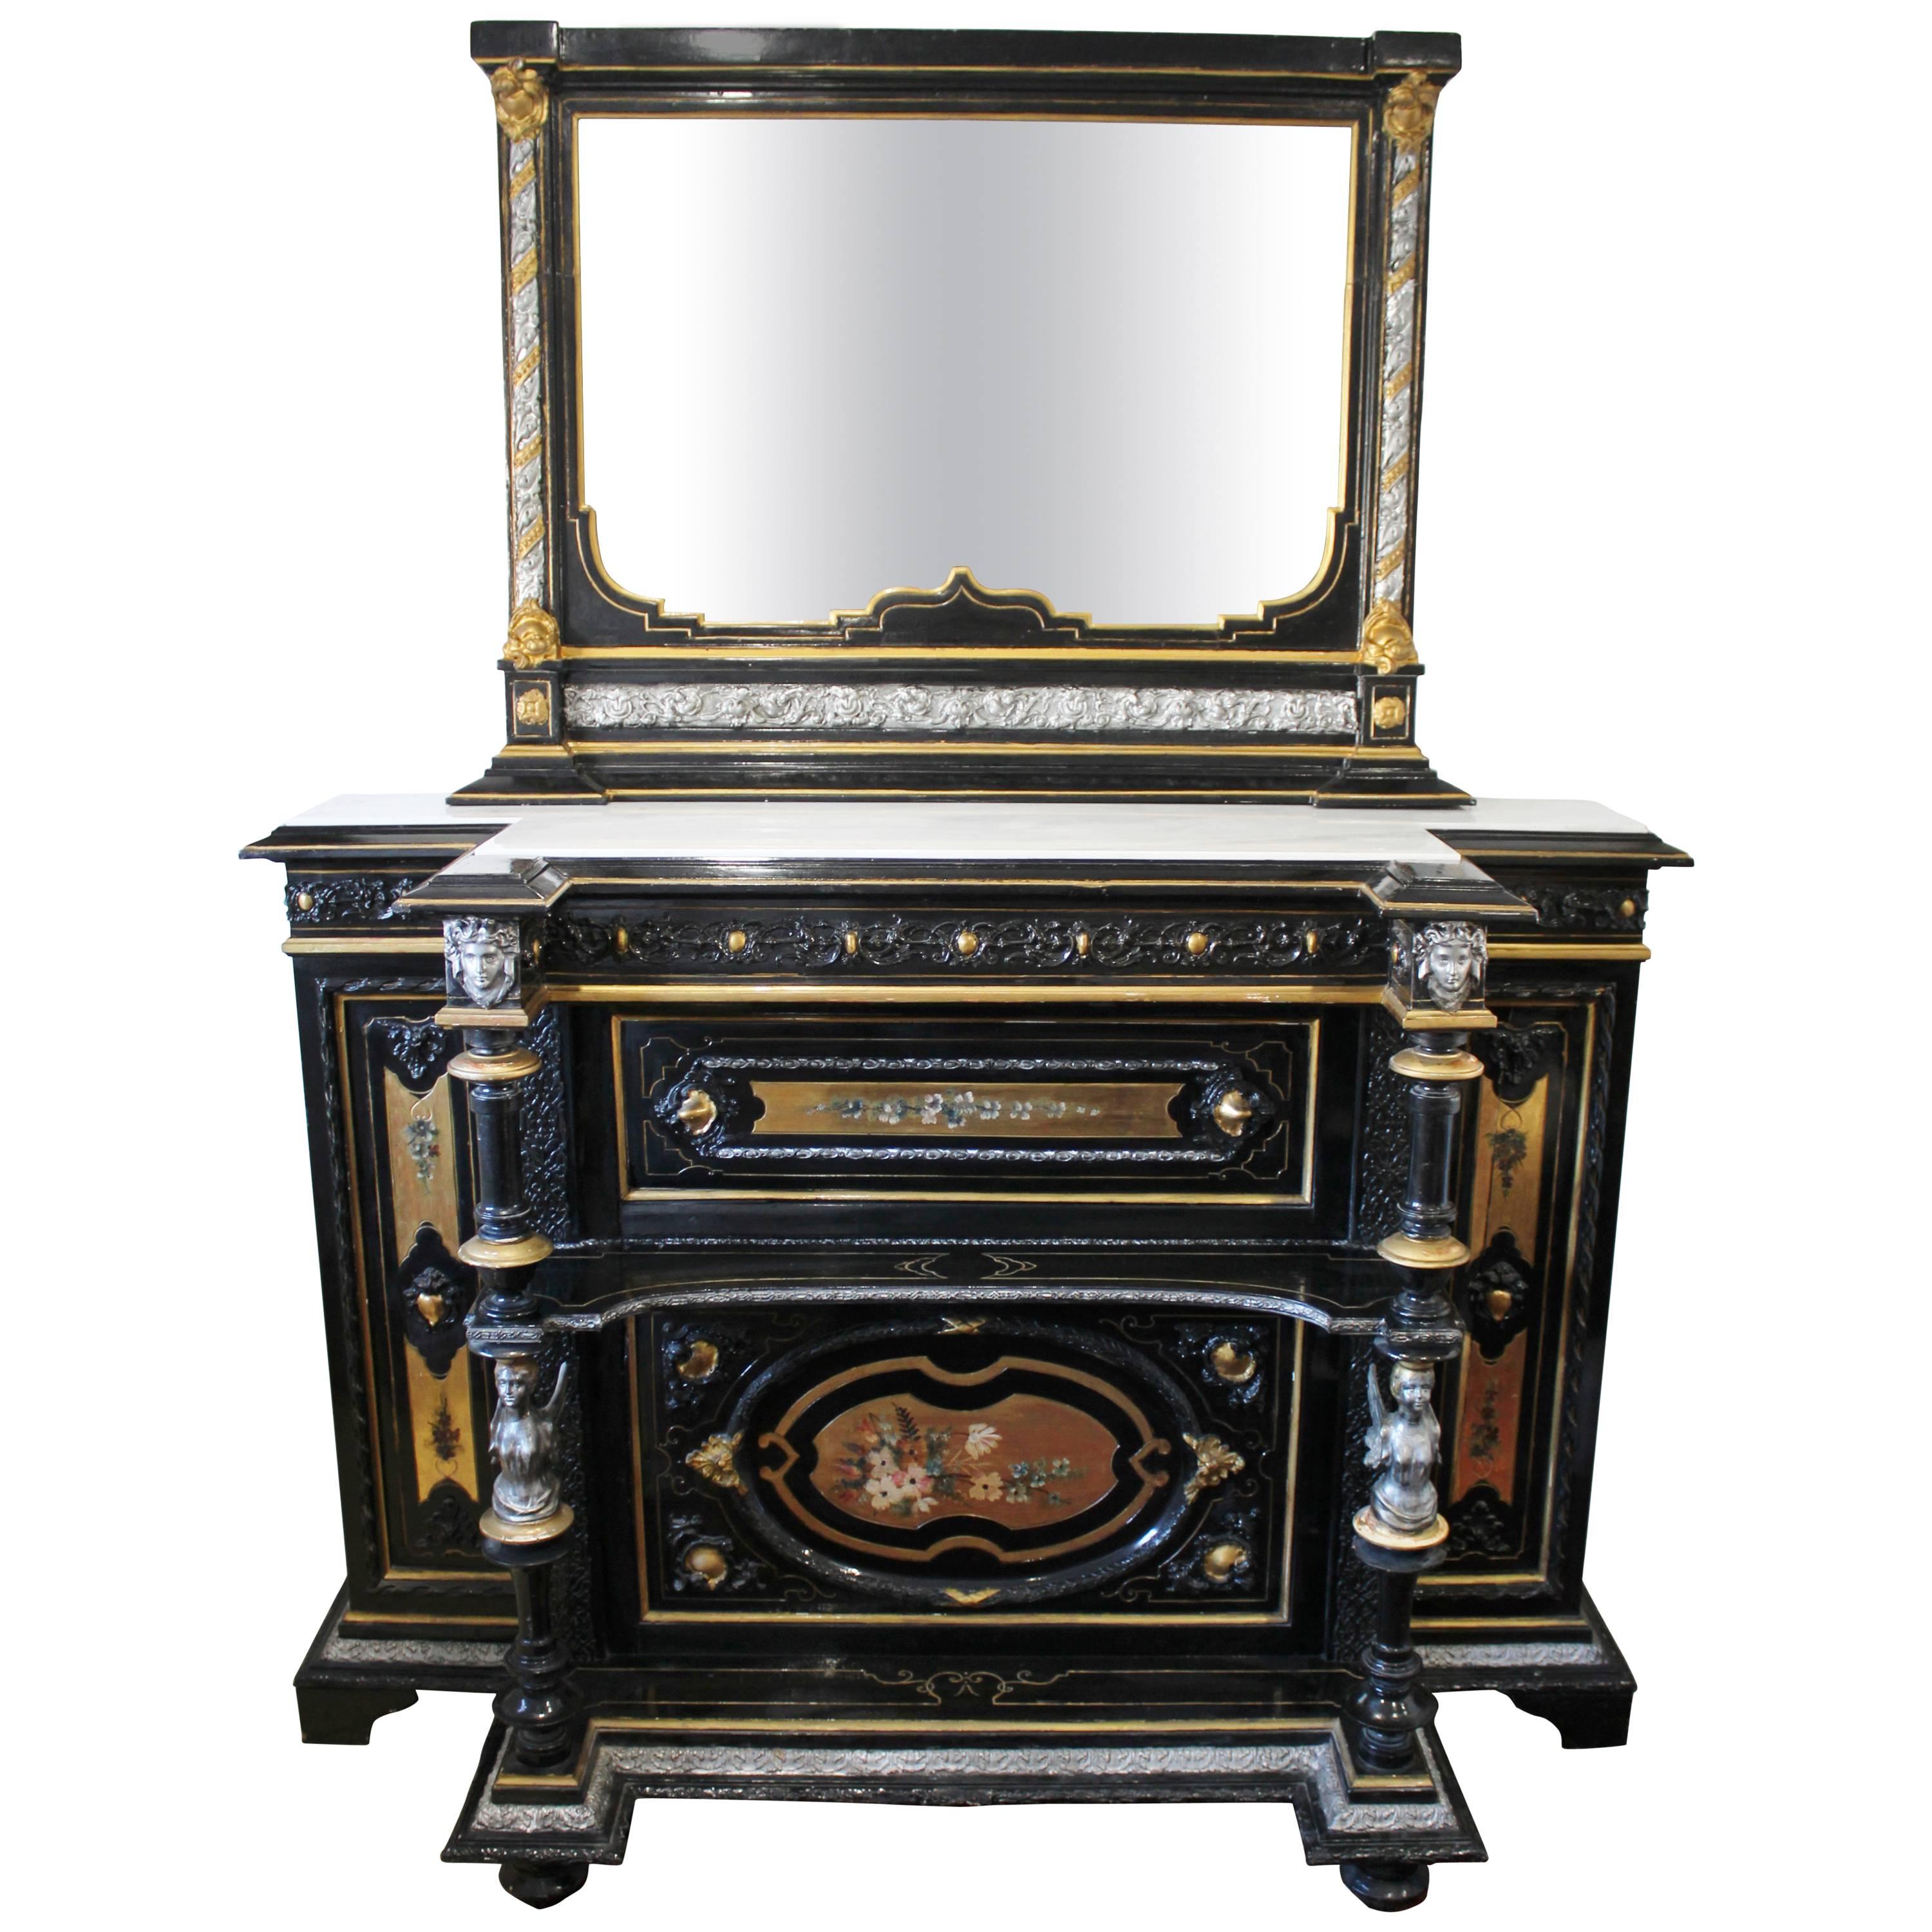 Early 19th Century Italian Hall Stand with Mirror